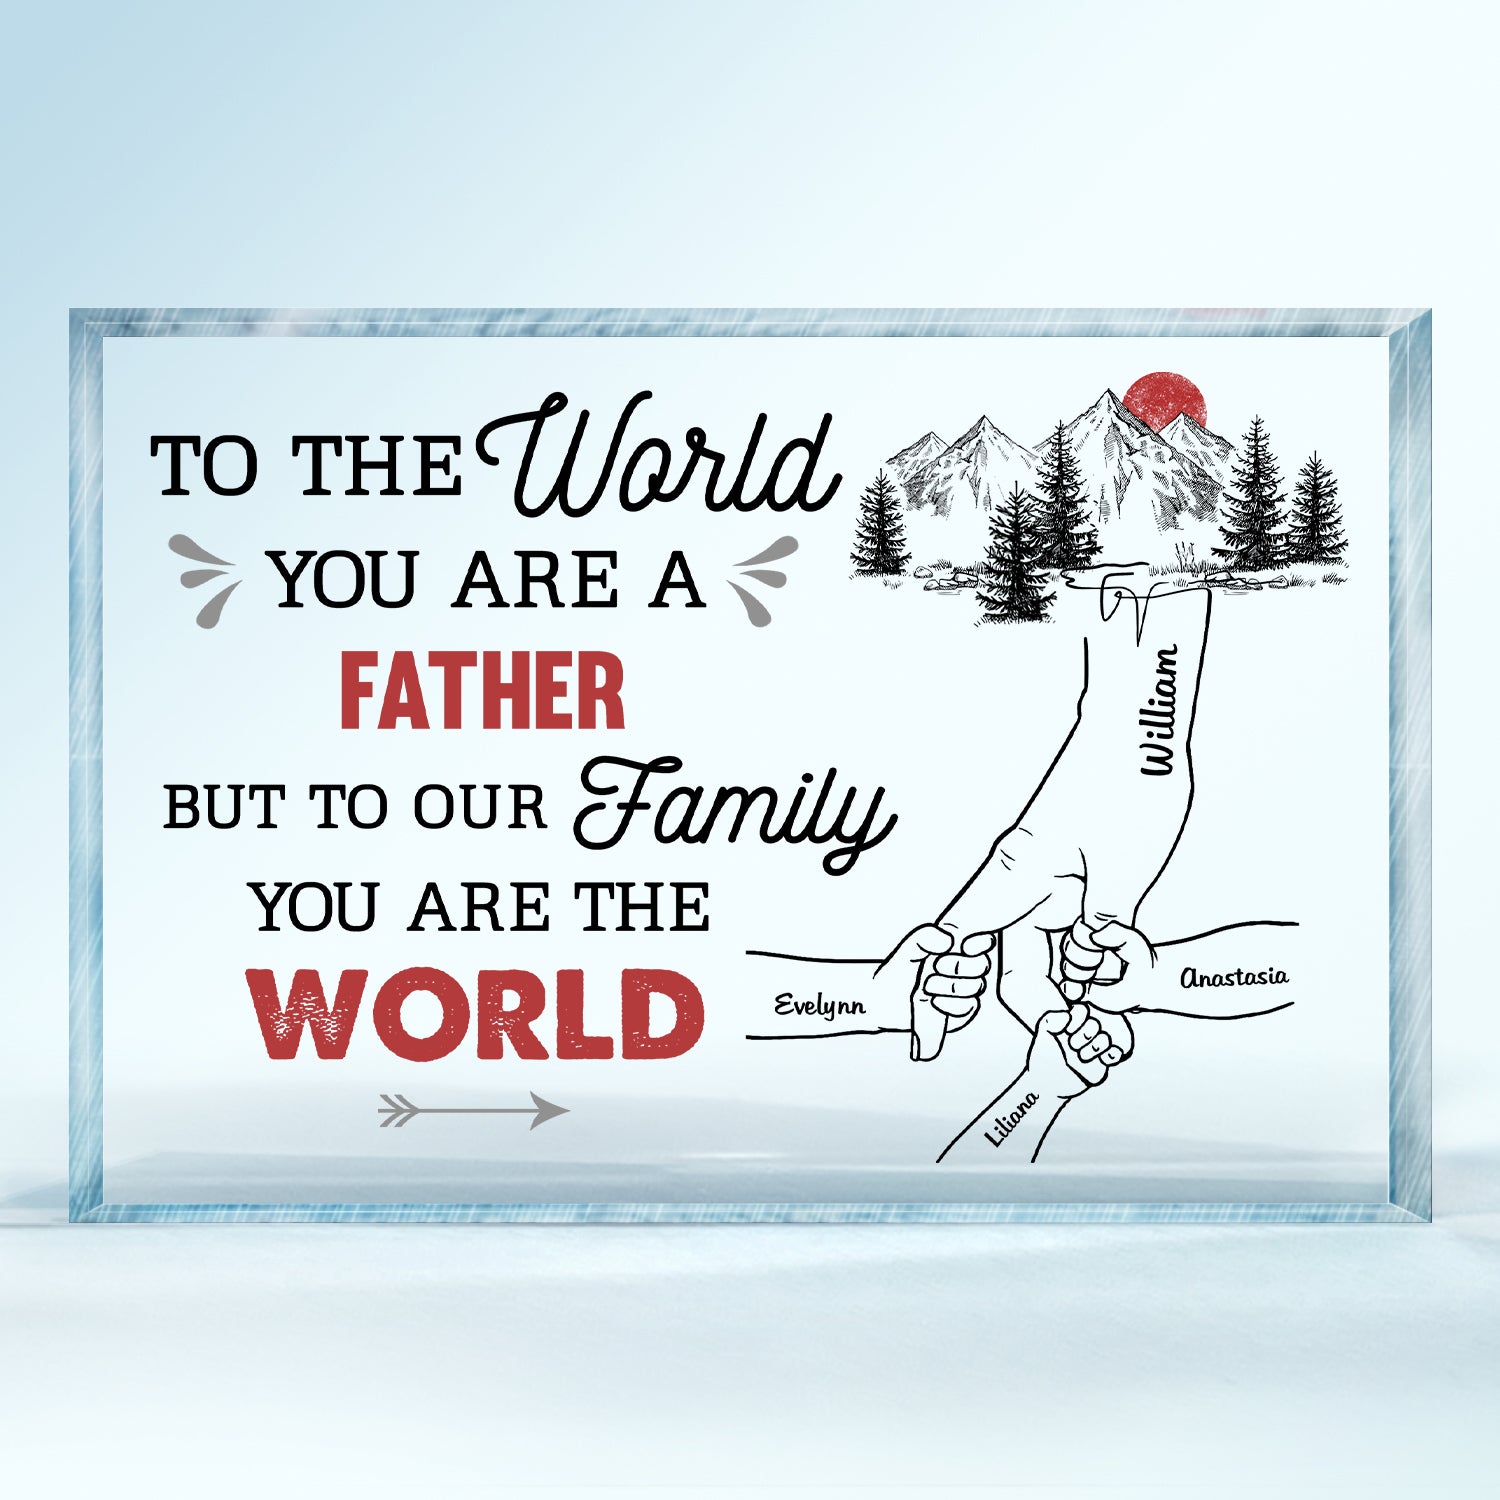 But To Our Family You Are The World - Birthday, Loving Gift For Dad, Father, Grandpa, Papa, Mom, Grandma, Parents, Grandparents - Personalized Custom Rectangle Shaped Acrylic Plaque